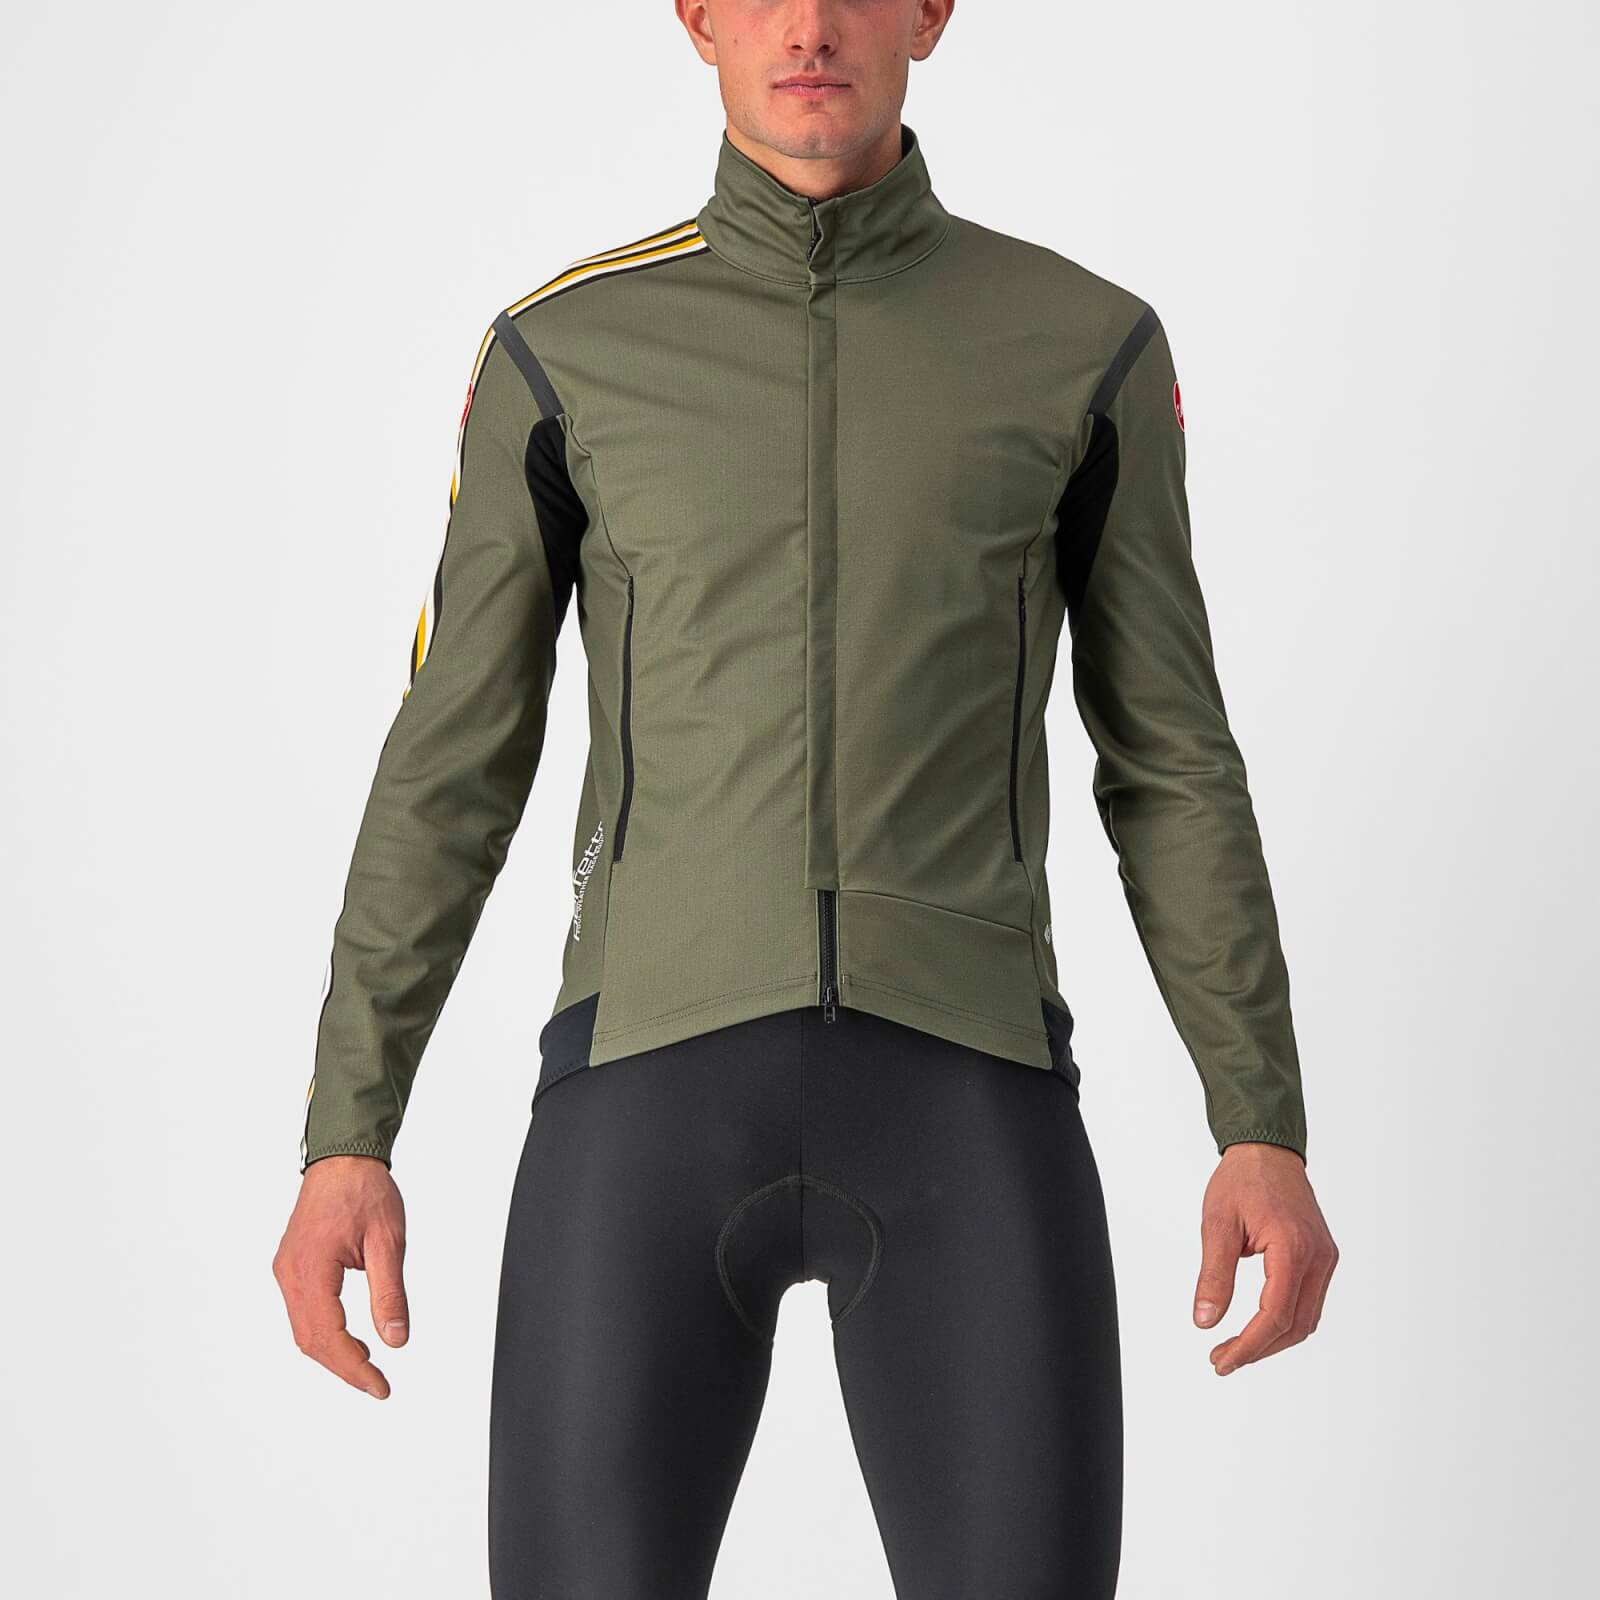 Castelli Unlimited Perfetto Ros 2 Jacket - XL - Military Green/Goldenrod